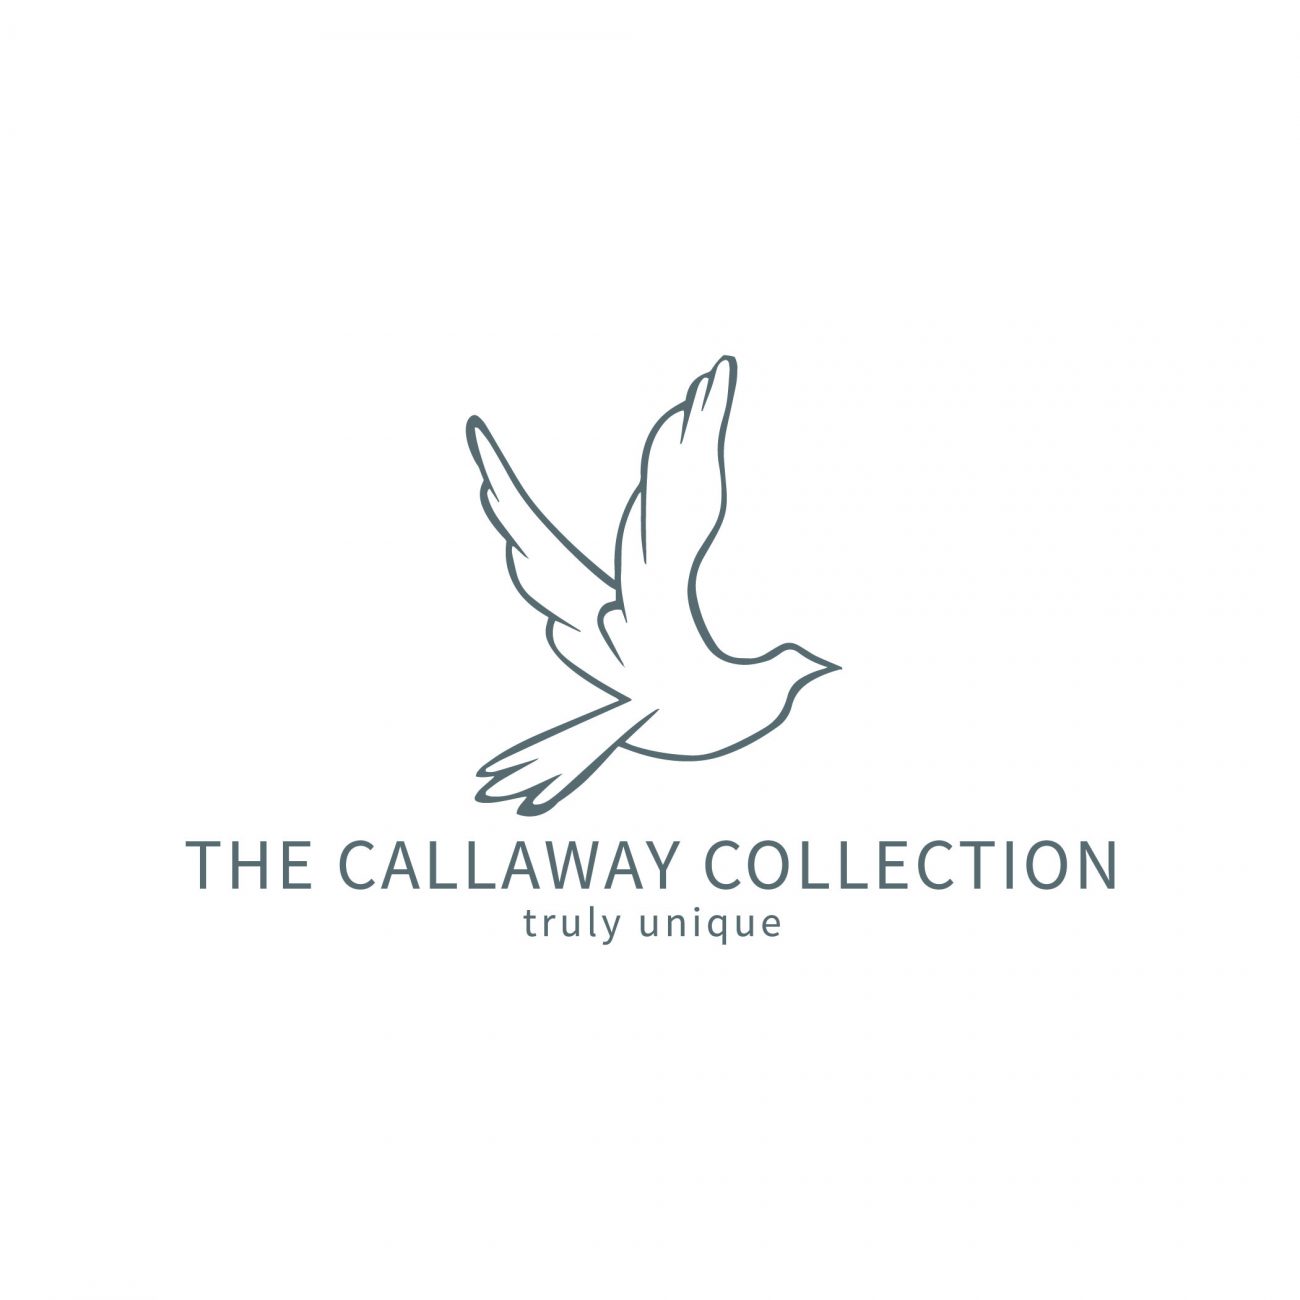 Home | The Callaway Collection by Hollis Callaway